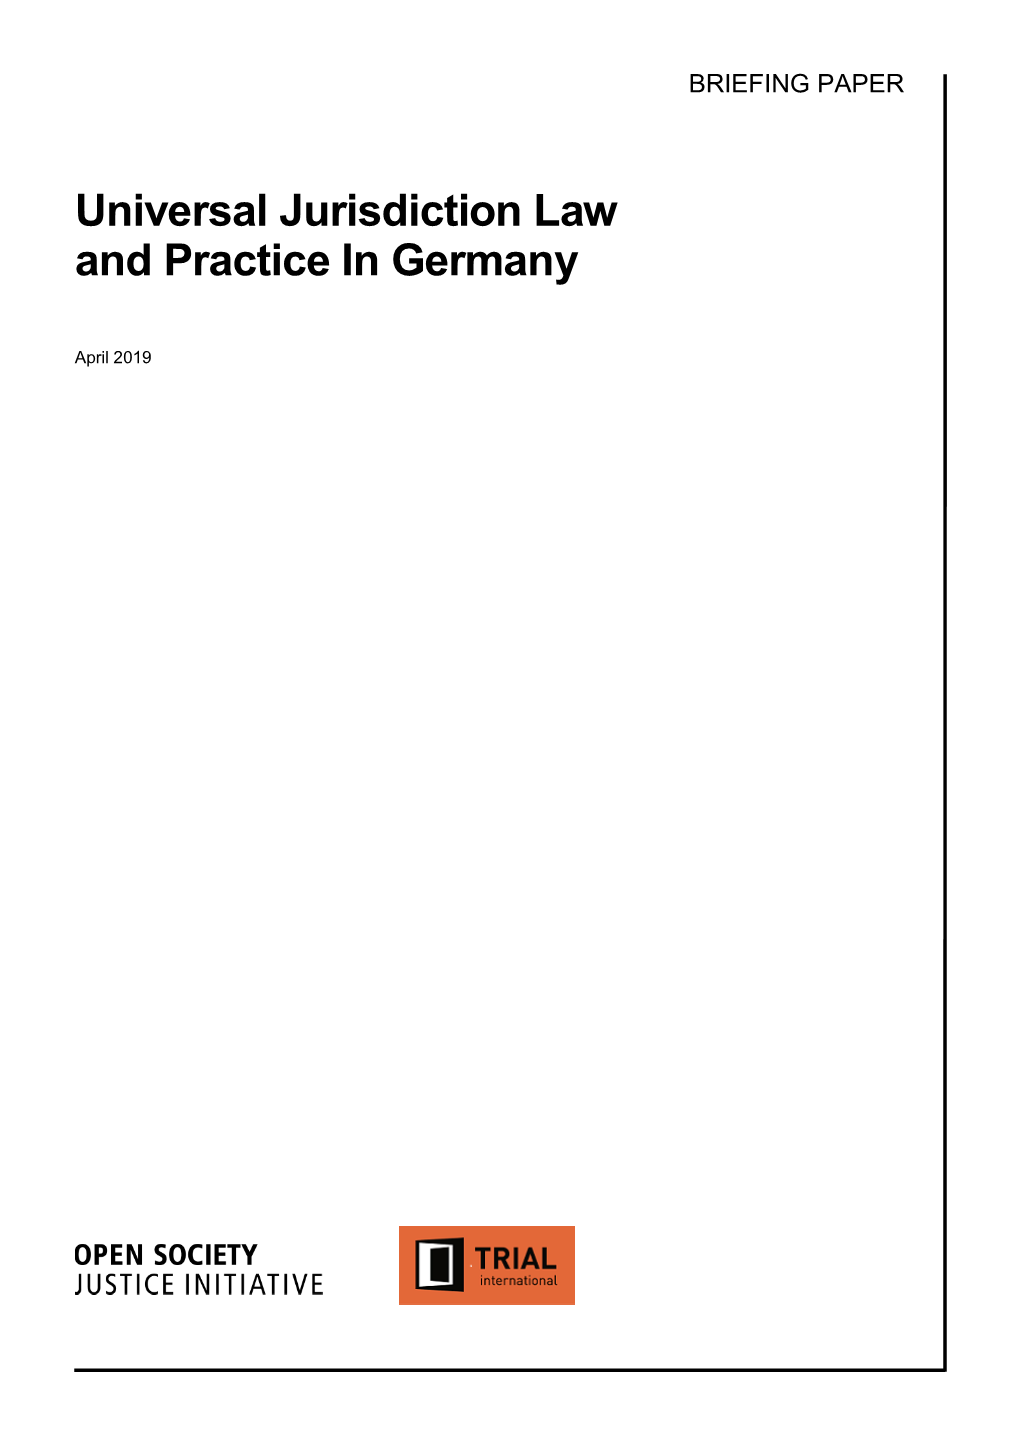 Universal Jurisdiction Law and Practice in Germany